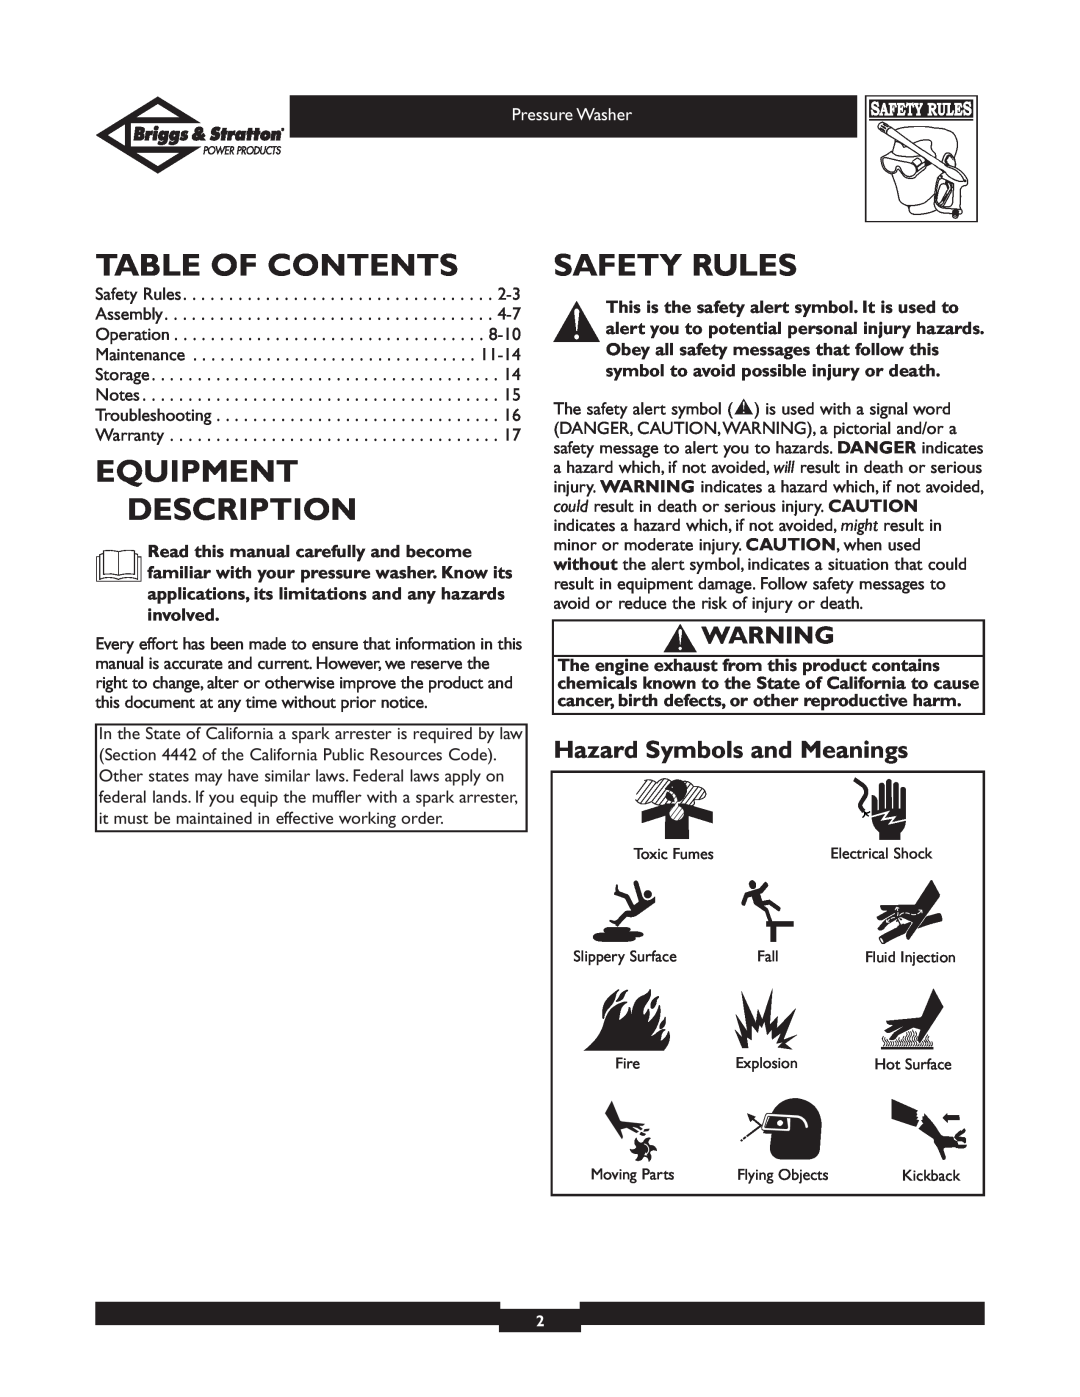 Briggs & Stratton 01936 owner manual Table Of Contents, Equipment Description, Safety Rules, Hazard Symbols and Meanings 